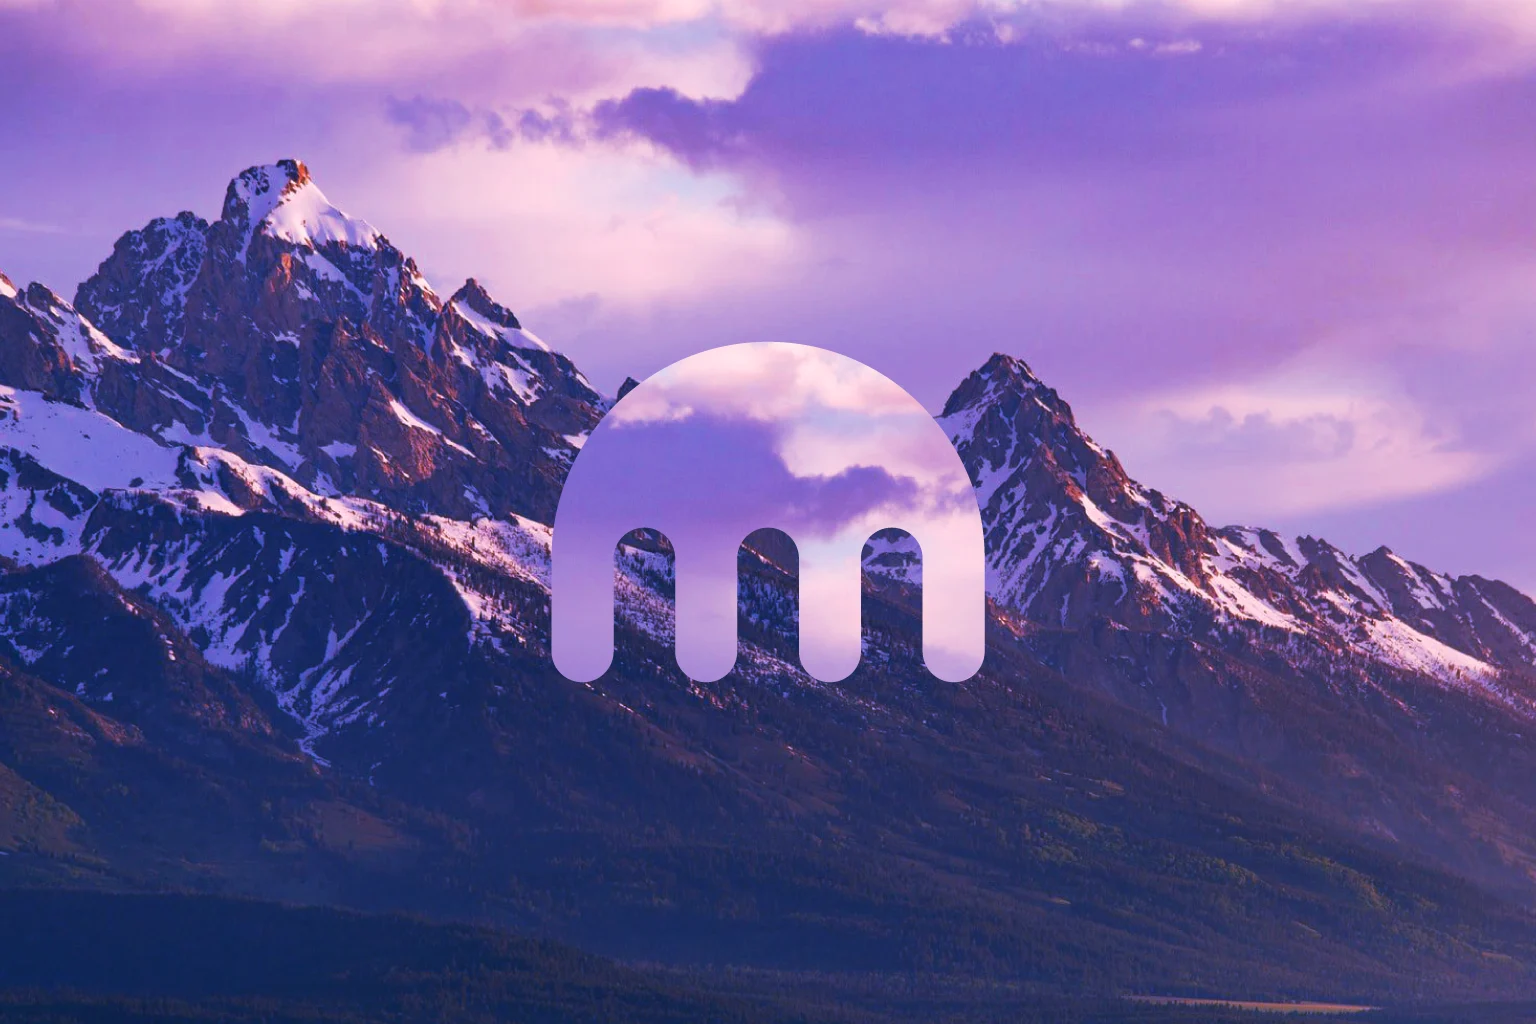 Kraken logo against snowy mountains and a violet sky